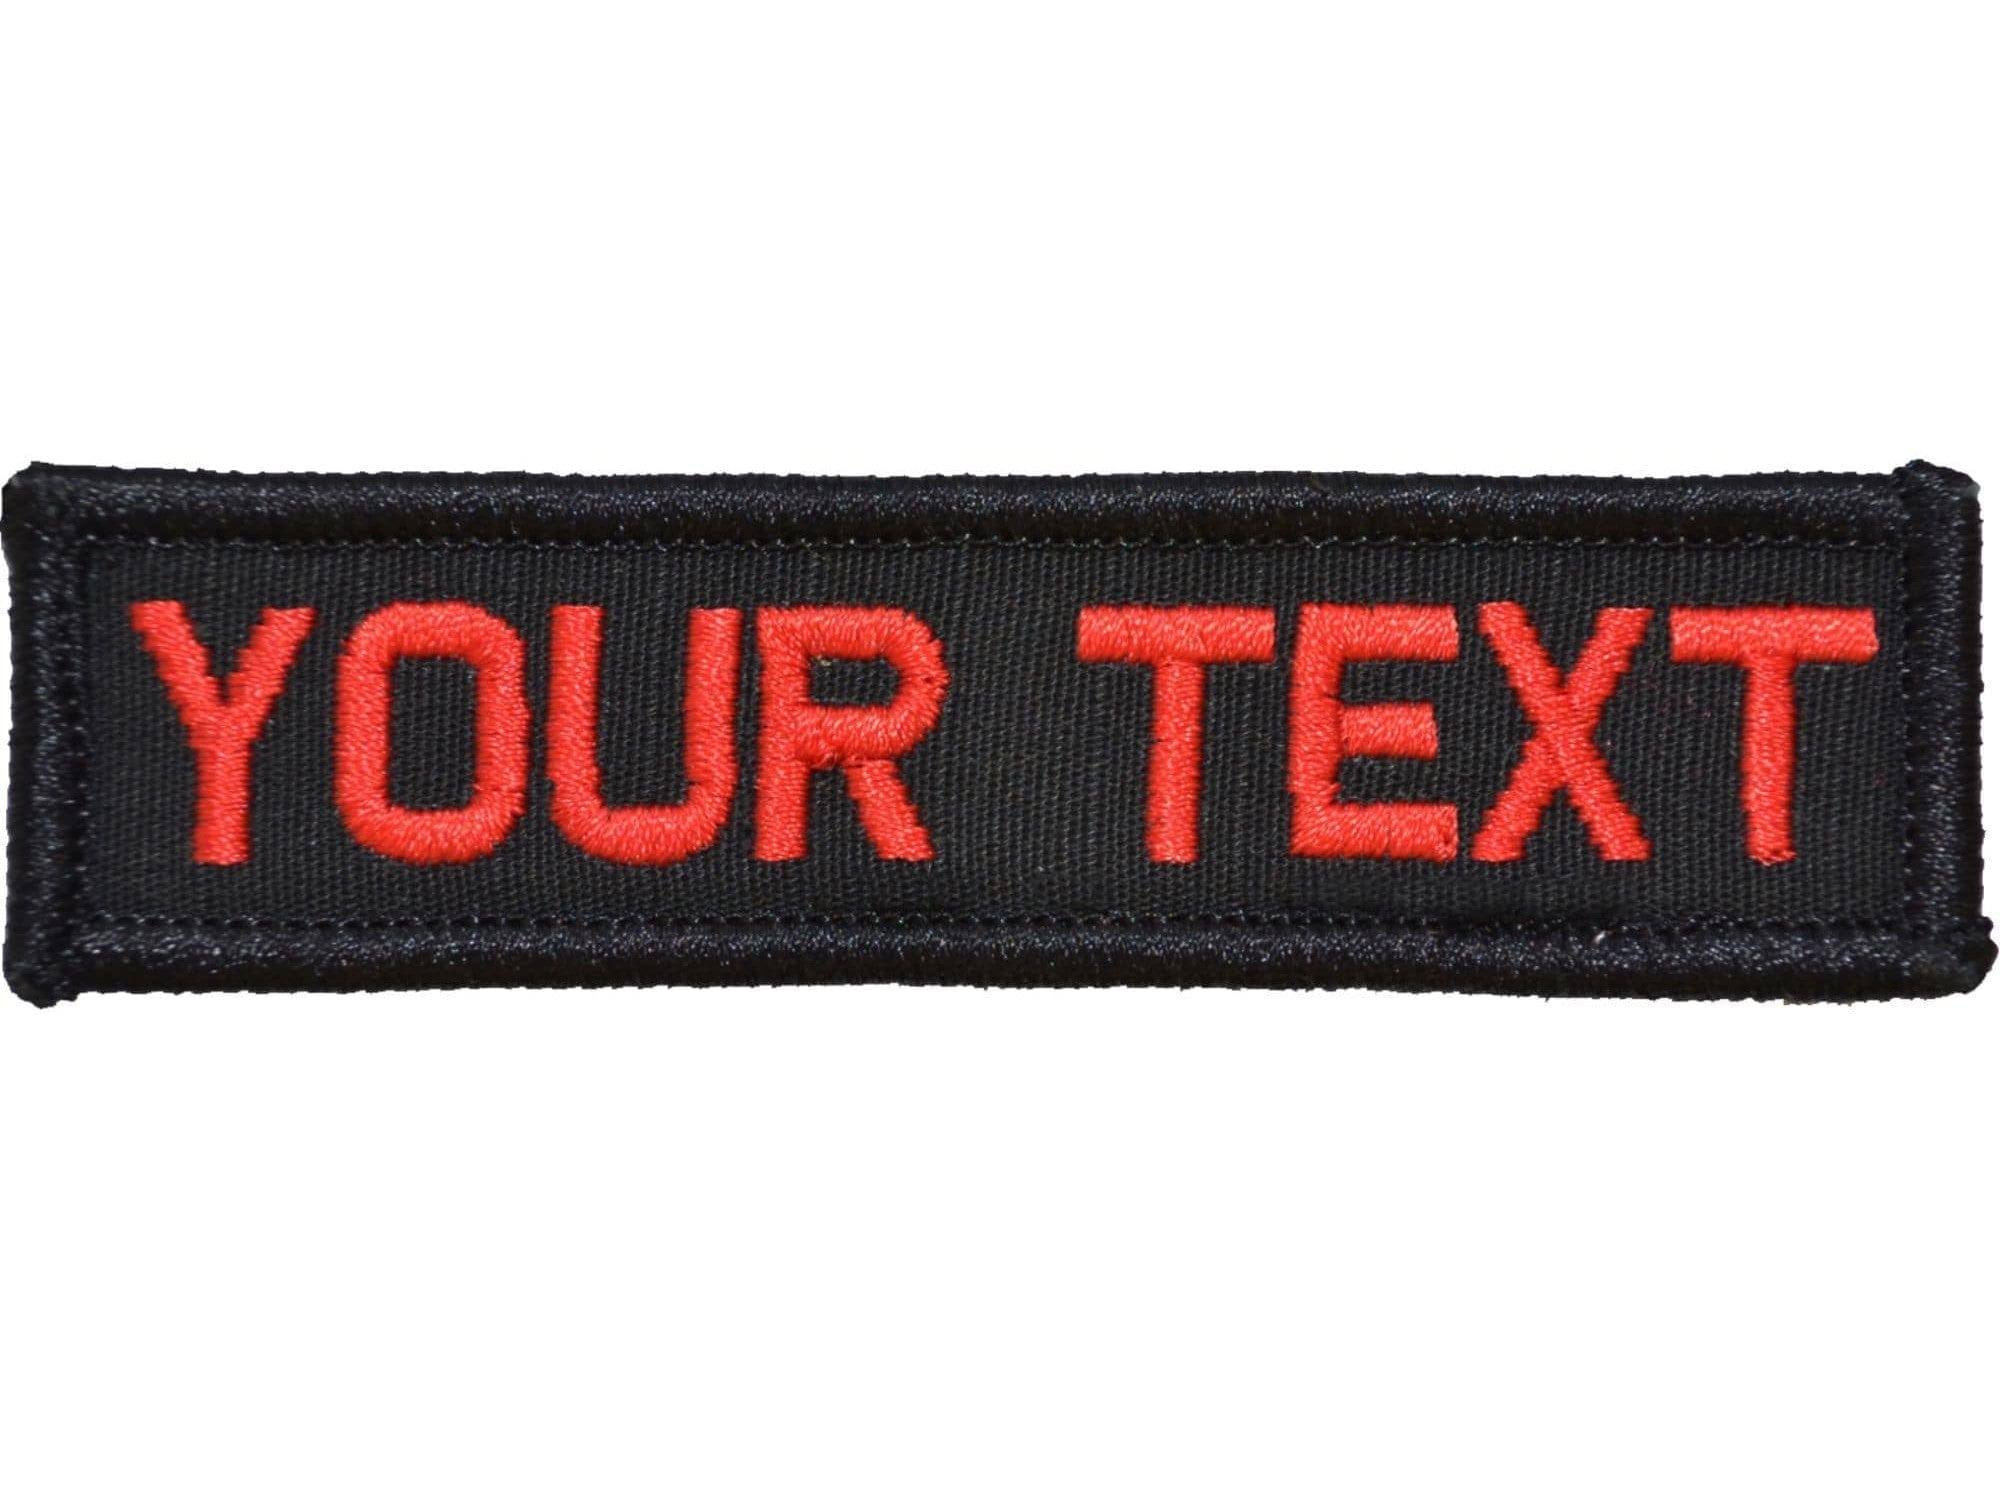 1x3.75 in Nametape Size, Custom Name Patch. Fits Operator Hats!